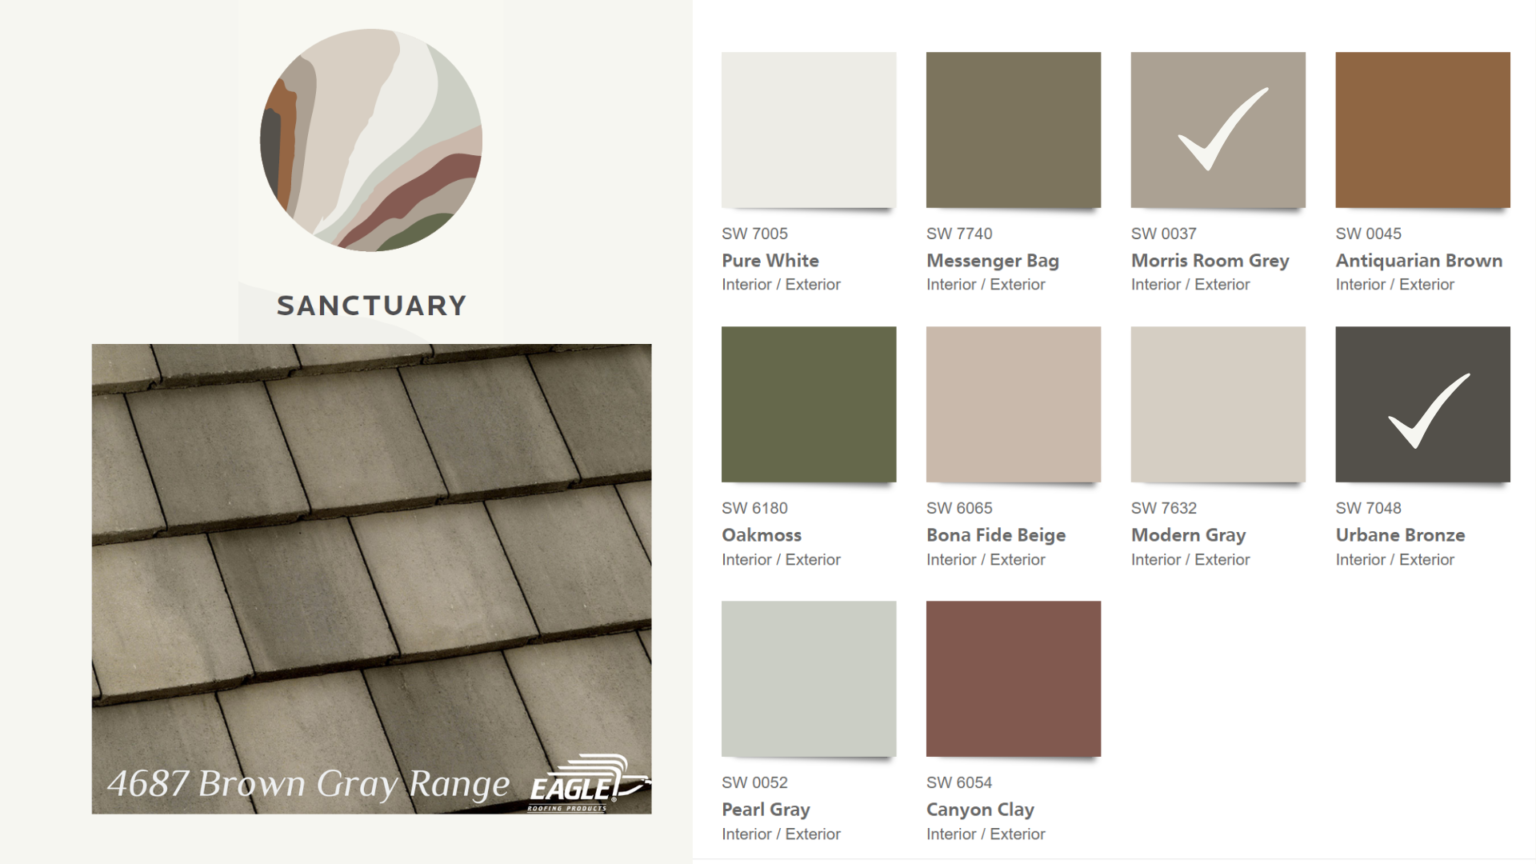 Concrete Roof Tiles to Pair with Sherwin Williams 2021 Color Trends